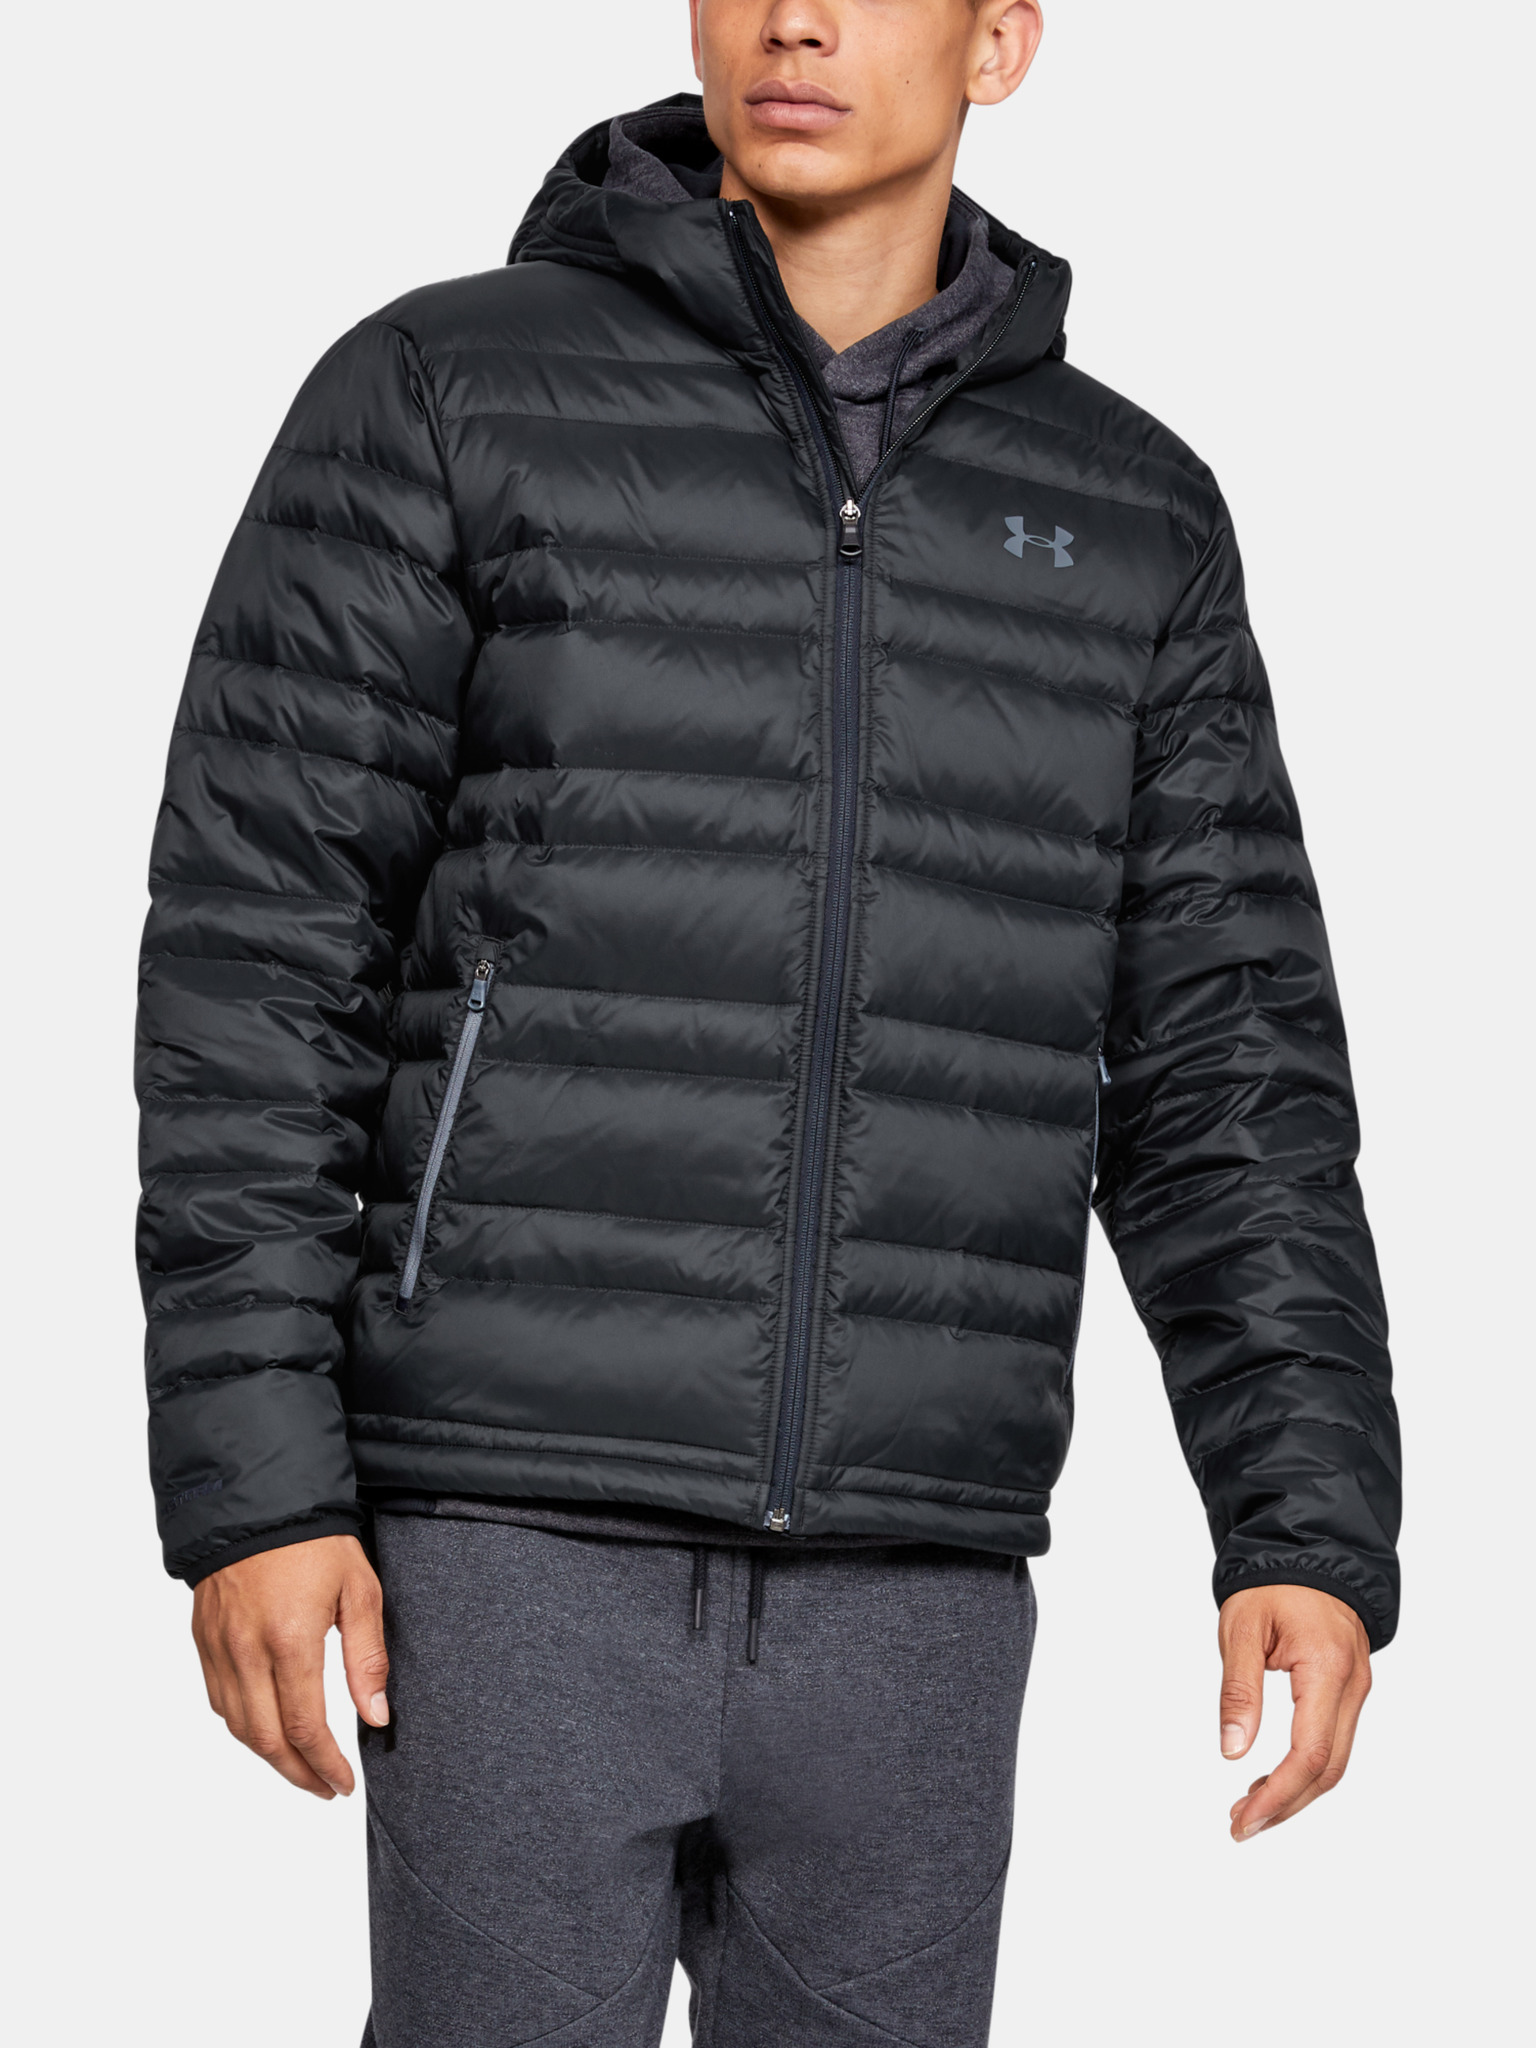 huiswerk hack Conclusie Under Armour - Armour Down Hooded Jas Bibloo.nl